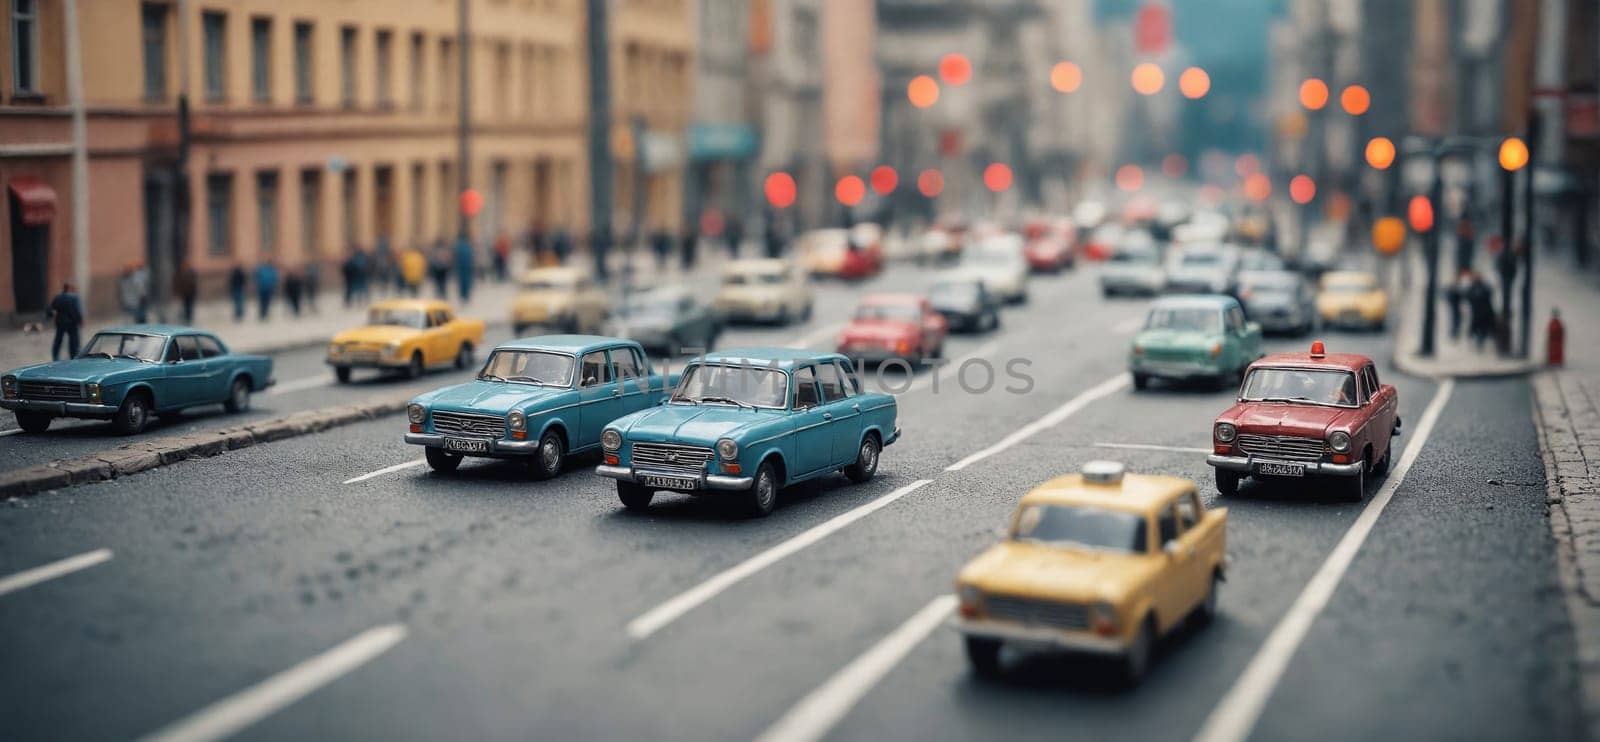 Motor vehicles drive down city street past buildings by Andre1ns